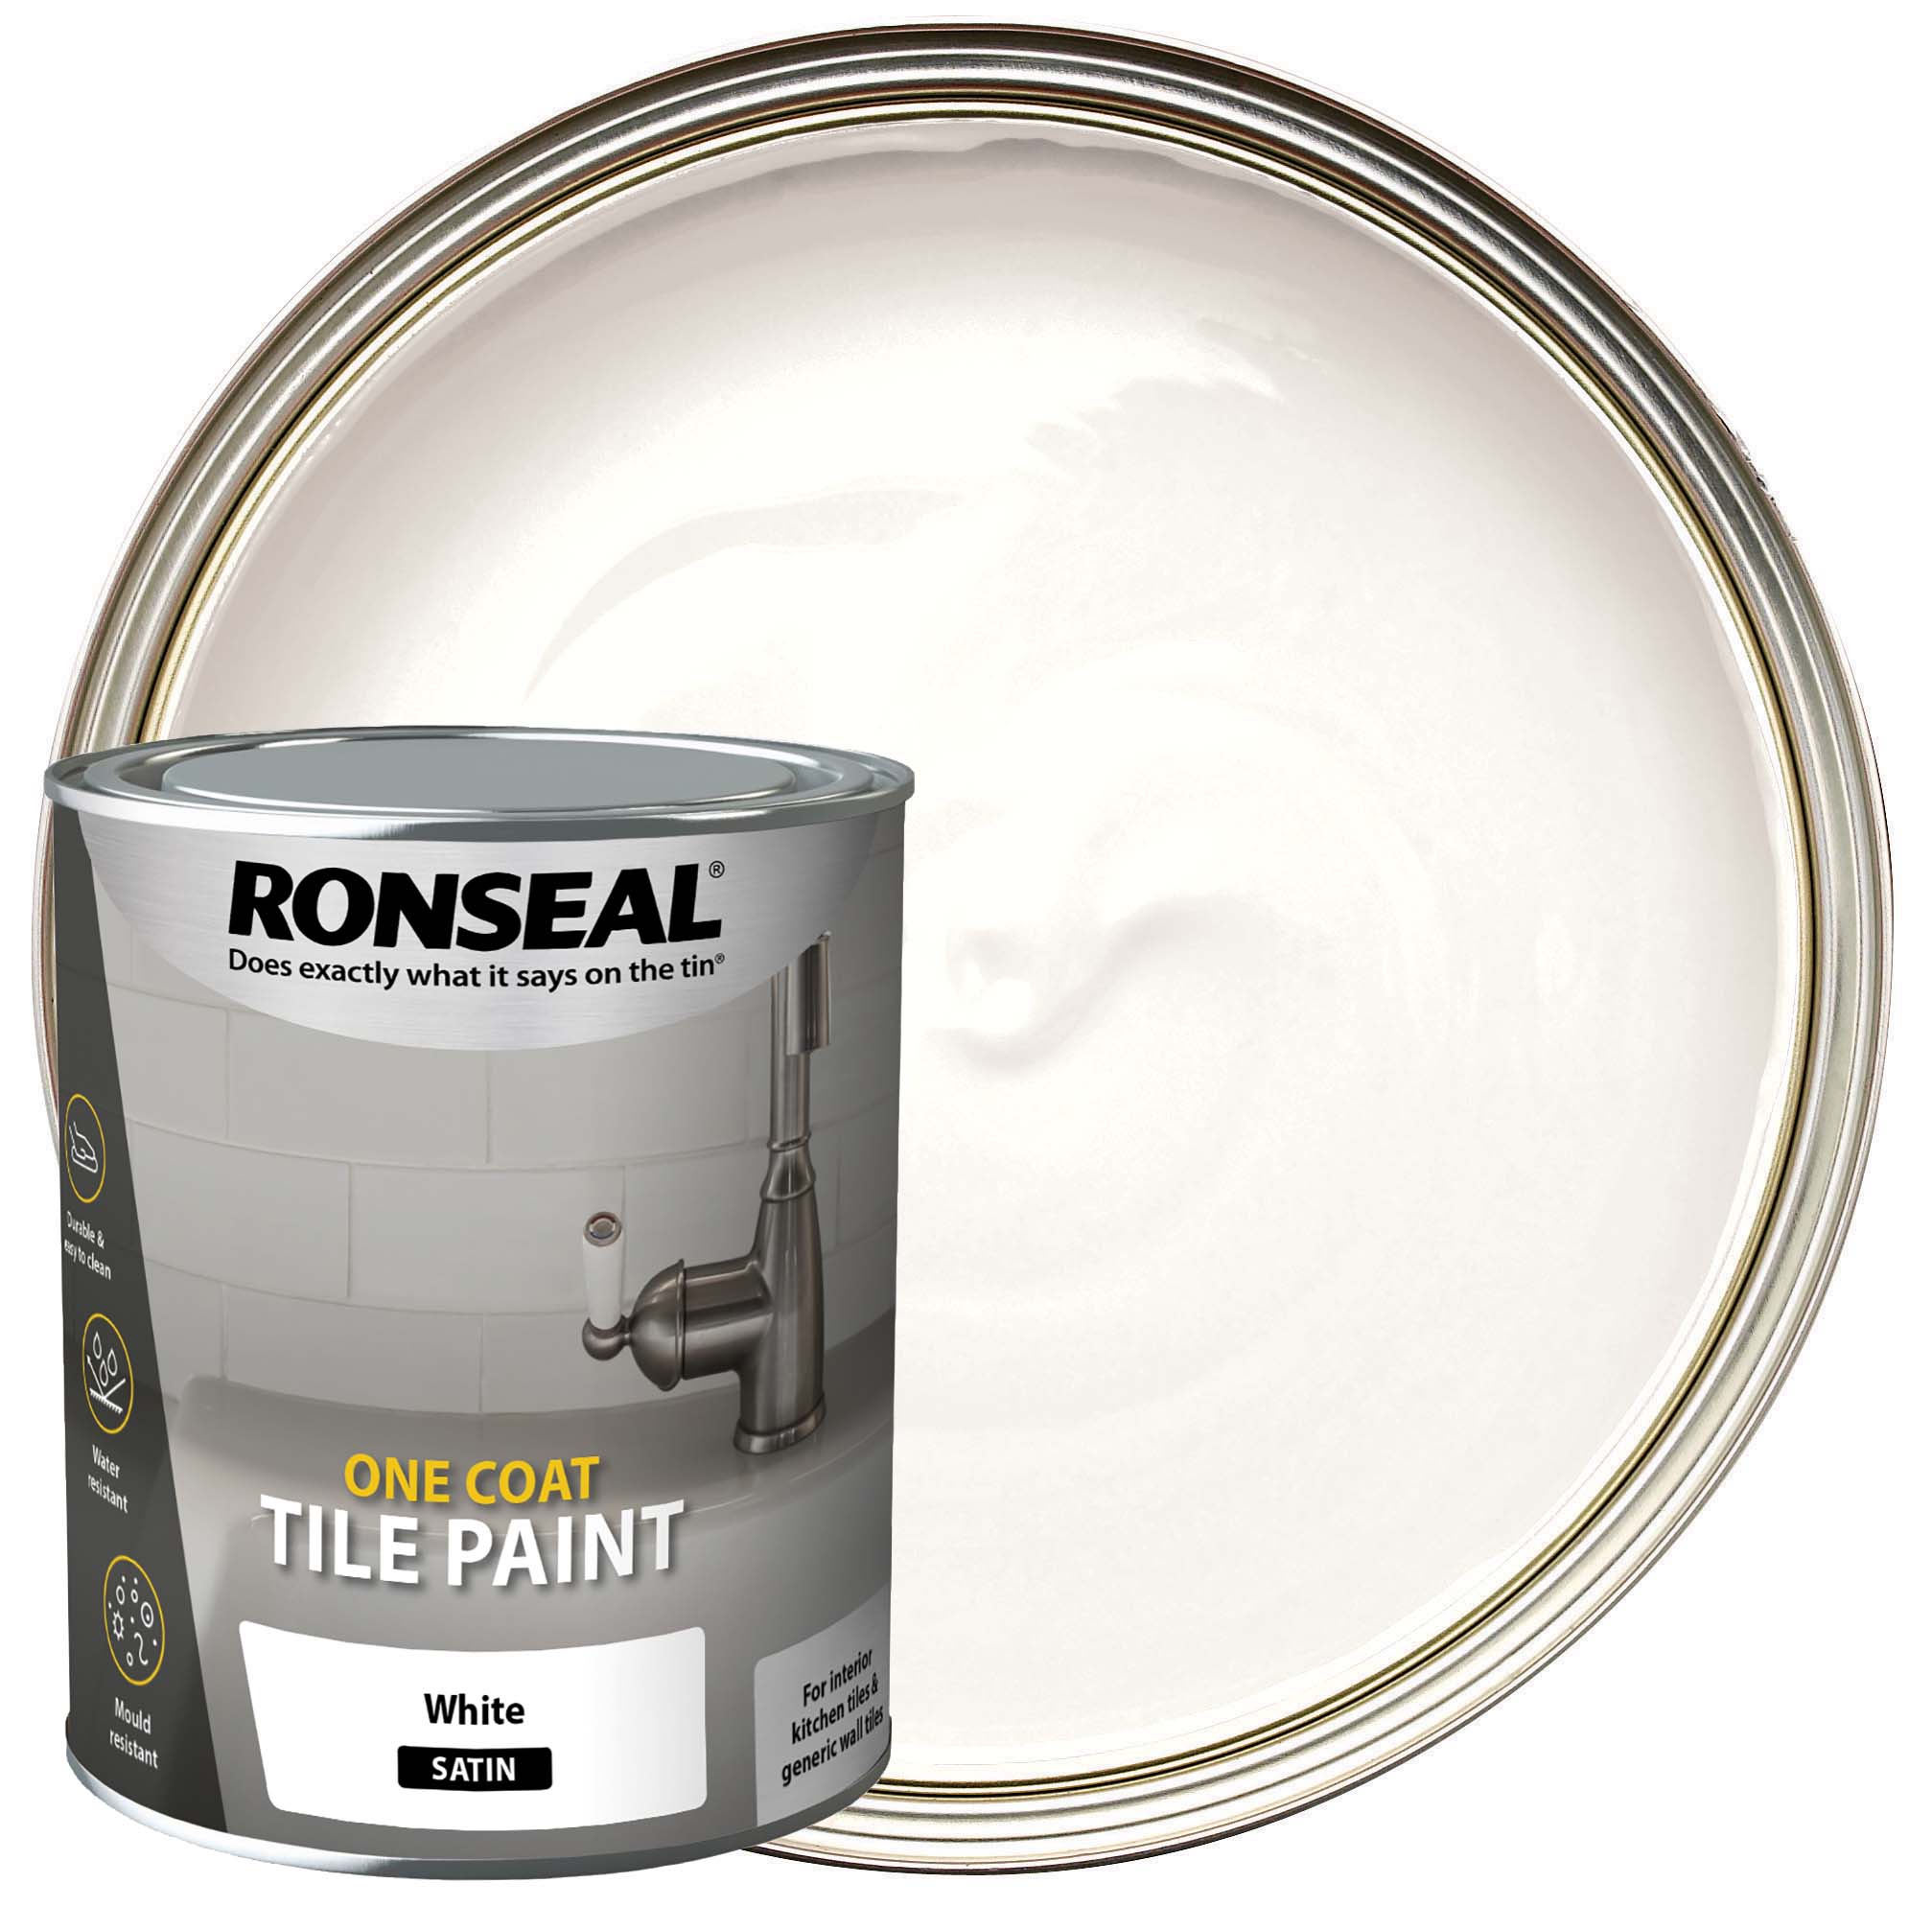 Image of Ronseal One Coat Tile Paint - Satin White 750ml